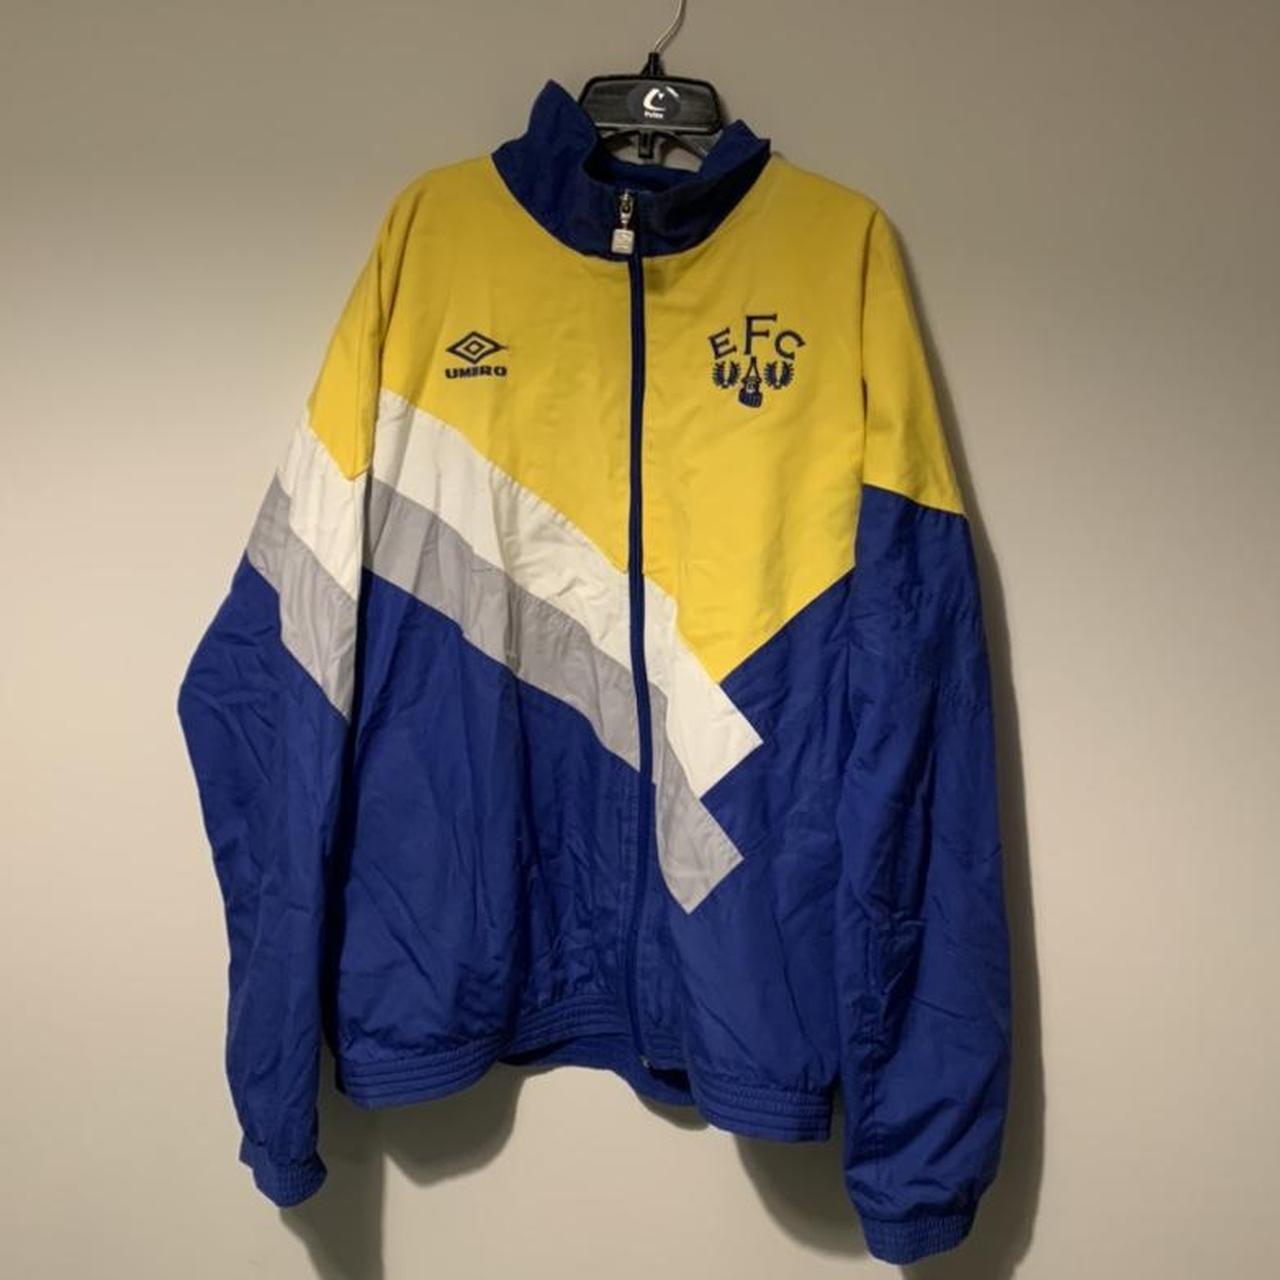 Vintage early 90s Umbro jacket with embroidered... - Depop